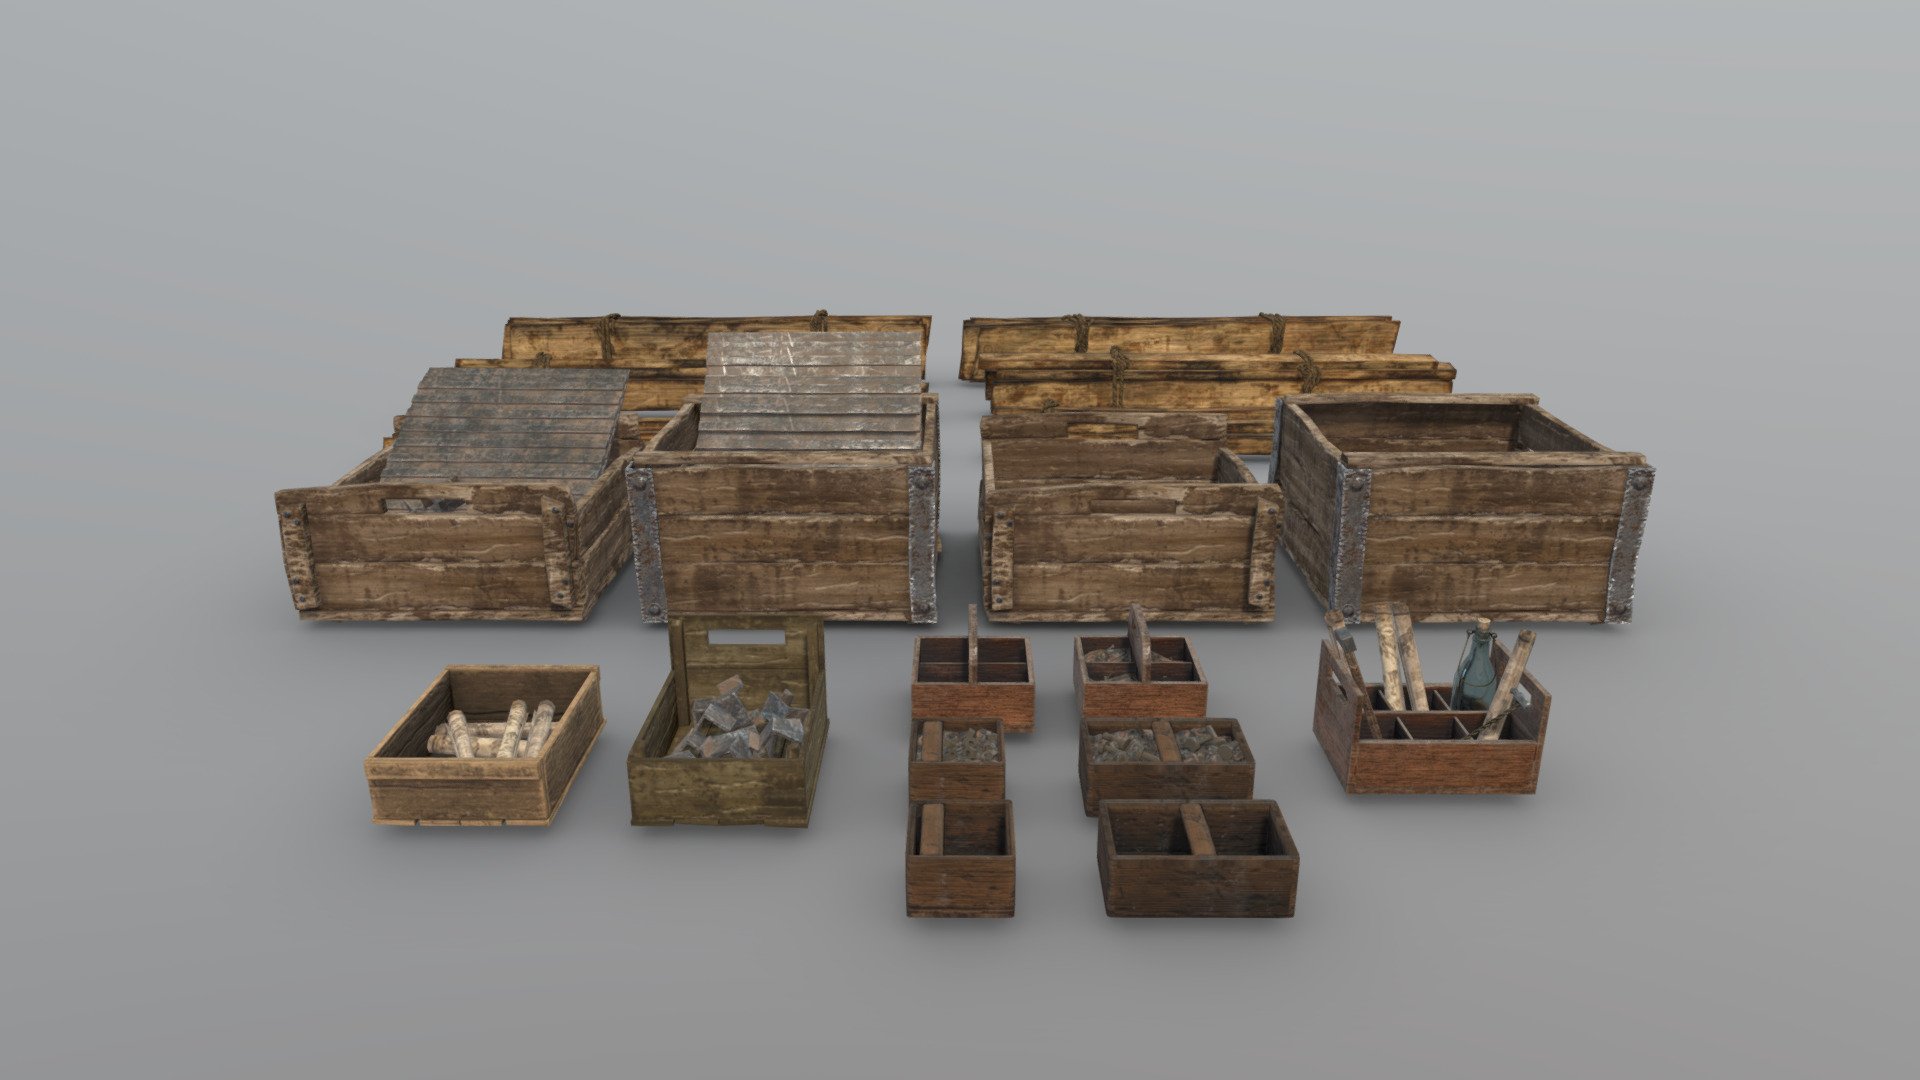 Personal work (3dsMax, Substance Painter, Photoshop)

These models are part of current Blockchain Game in development: Goldfever

Gold Fever - Have fun and earn with our gold rush simulation &hellip;
https://goldfever.io - Wood Boxes, Tools and Wood Props - 3D model by Xorxe 3d model